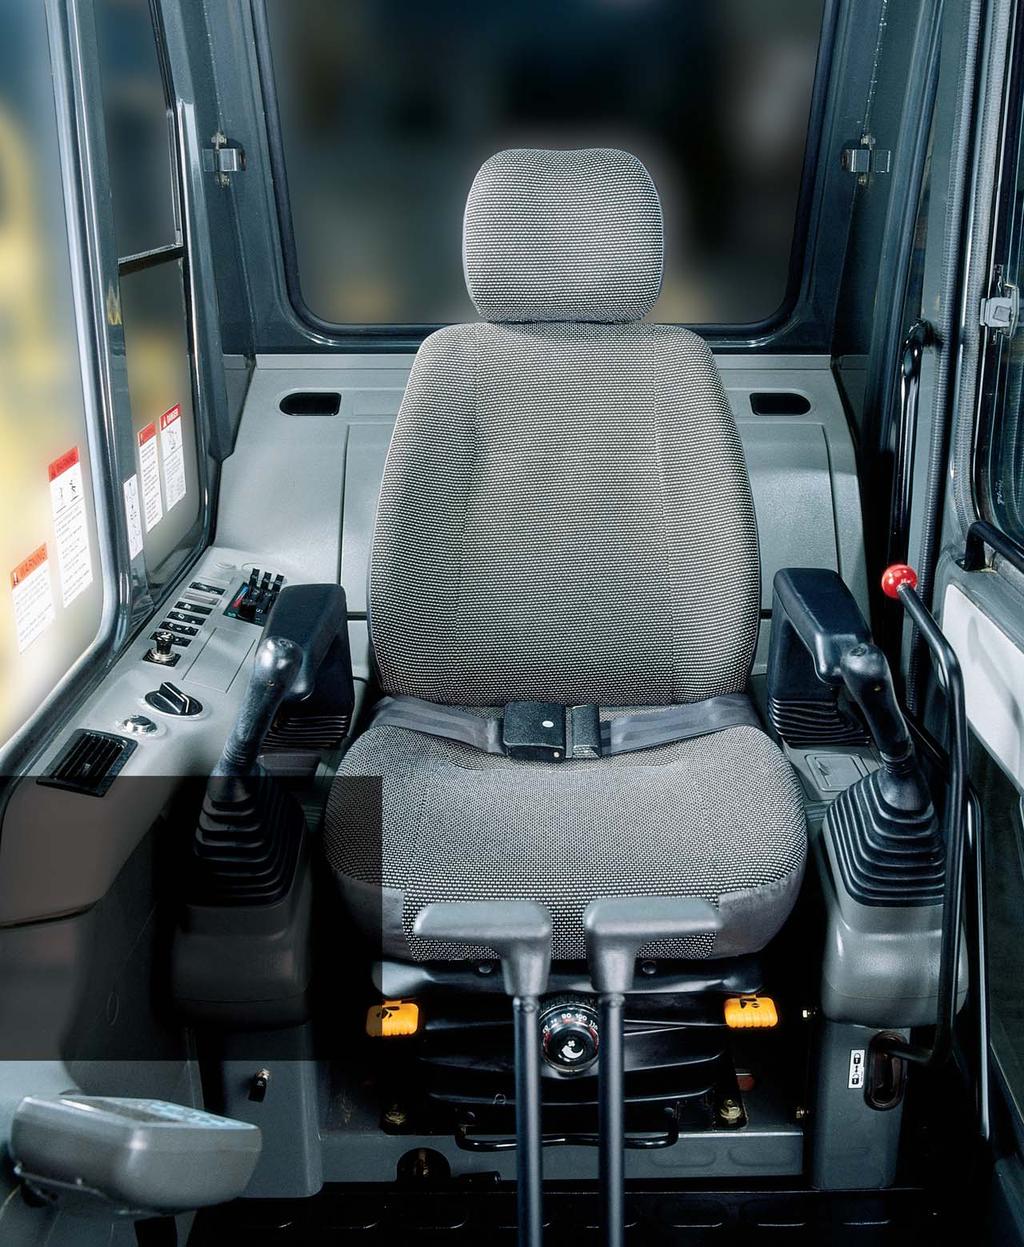 H YDRAULIC E XCAVATOR PC120-6/LC-6 The Avance cab interior is spacious and provides a comfortable working environment.... 6 7 8 4 5 3 9 2 PC120-6 Hydraulic Excavator Net Horsepower: 66.